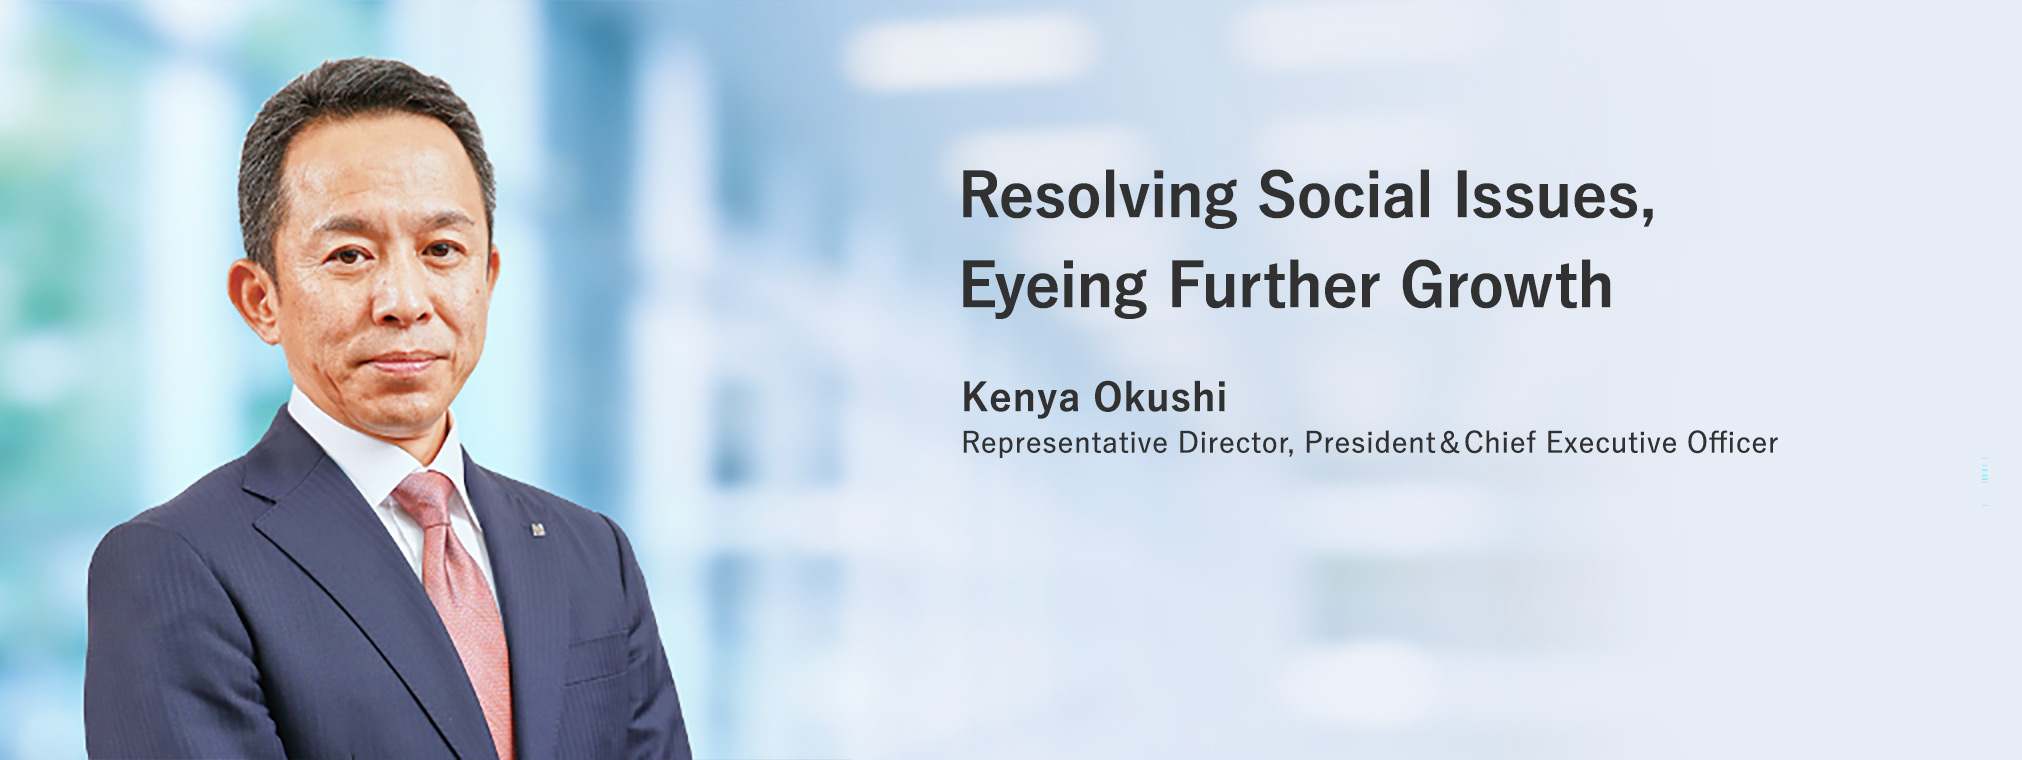 Resolving Social Issues, Eyeing Further Growth Kenya Okushi Representative Director, President & Chief Executive Officer